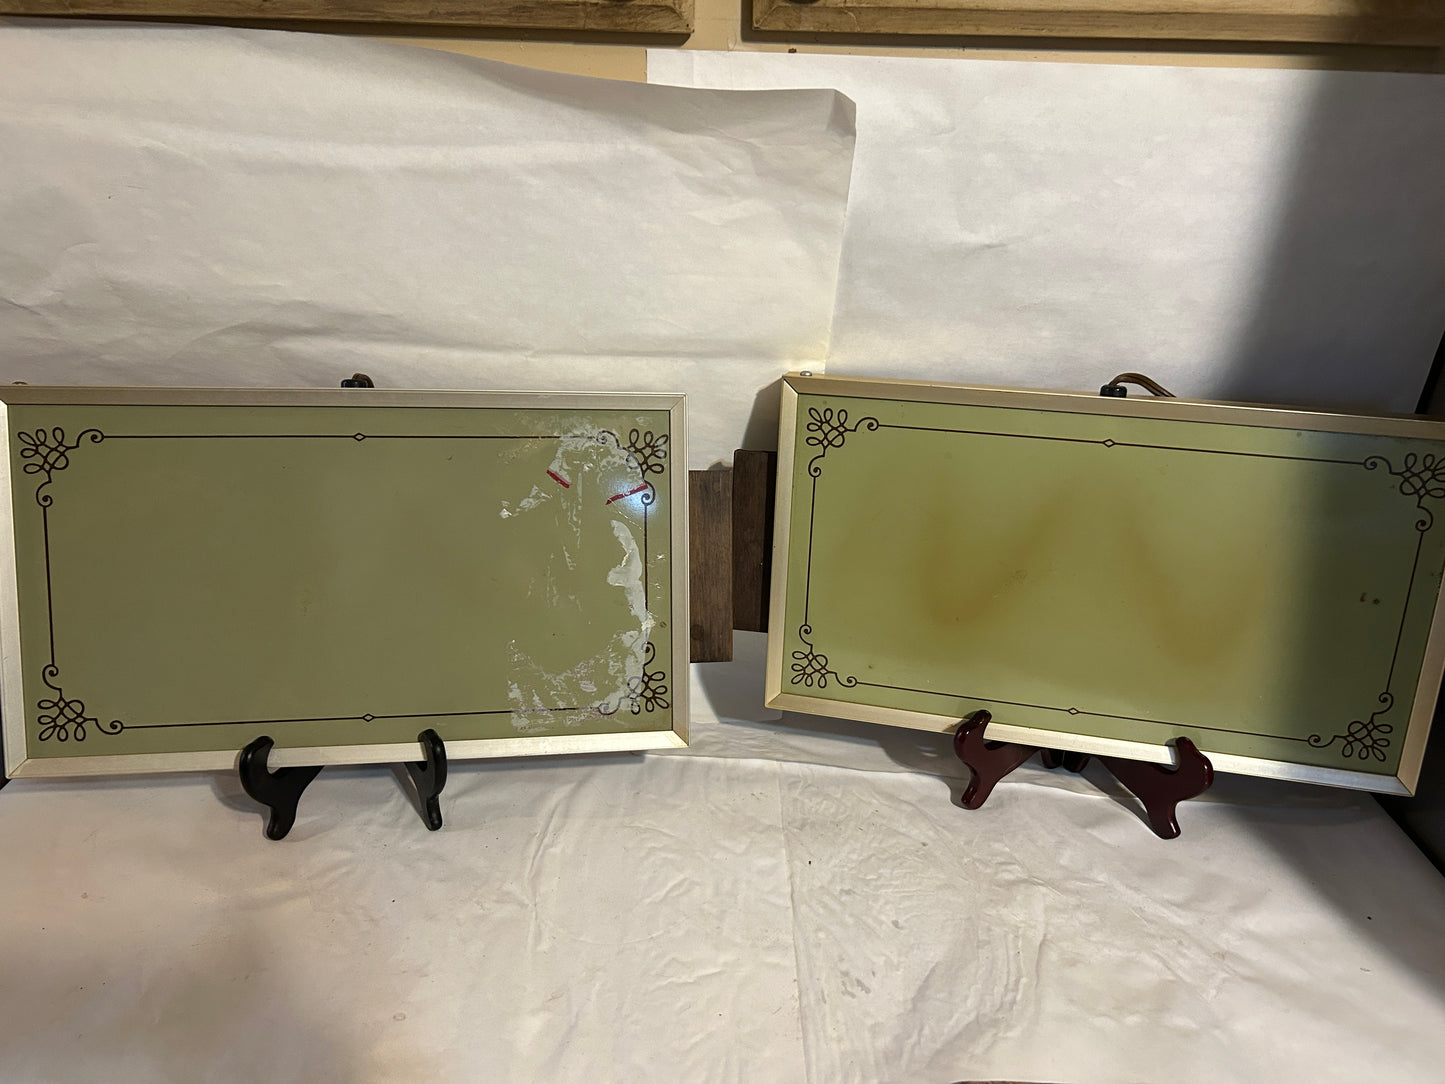 Pair of CORNWALL ELECTRIC 1973 VINTAGE HOT TRAY